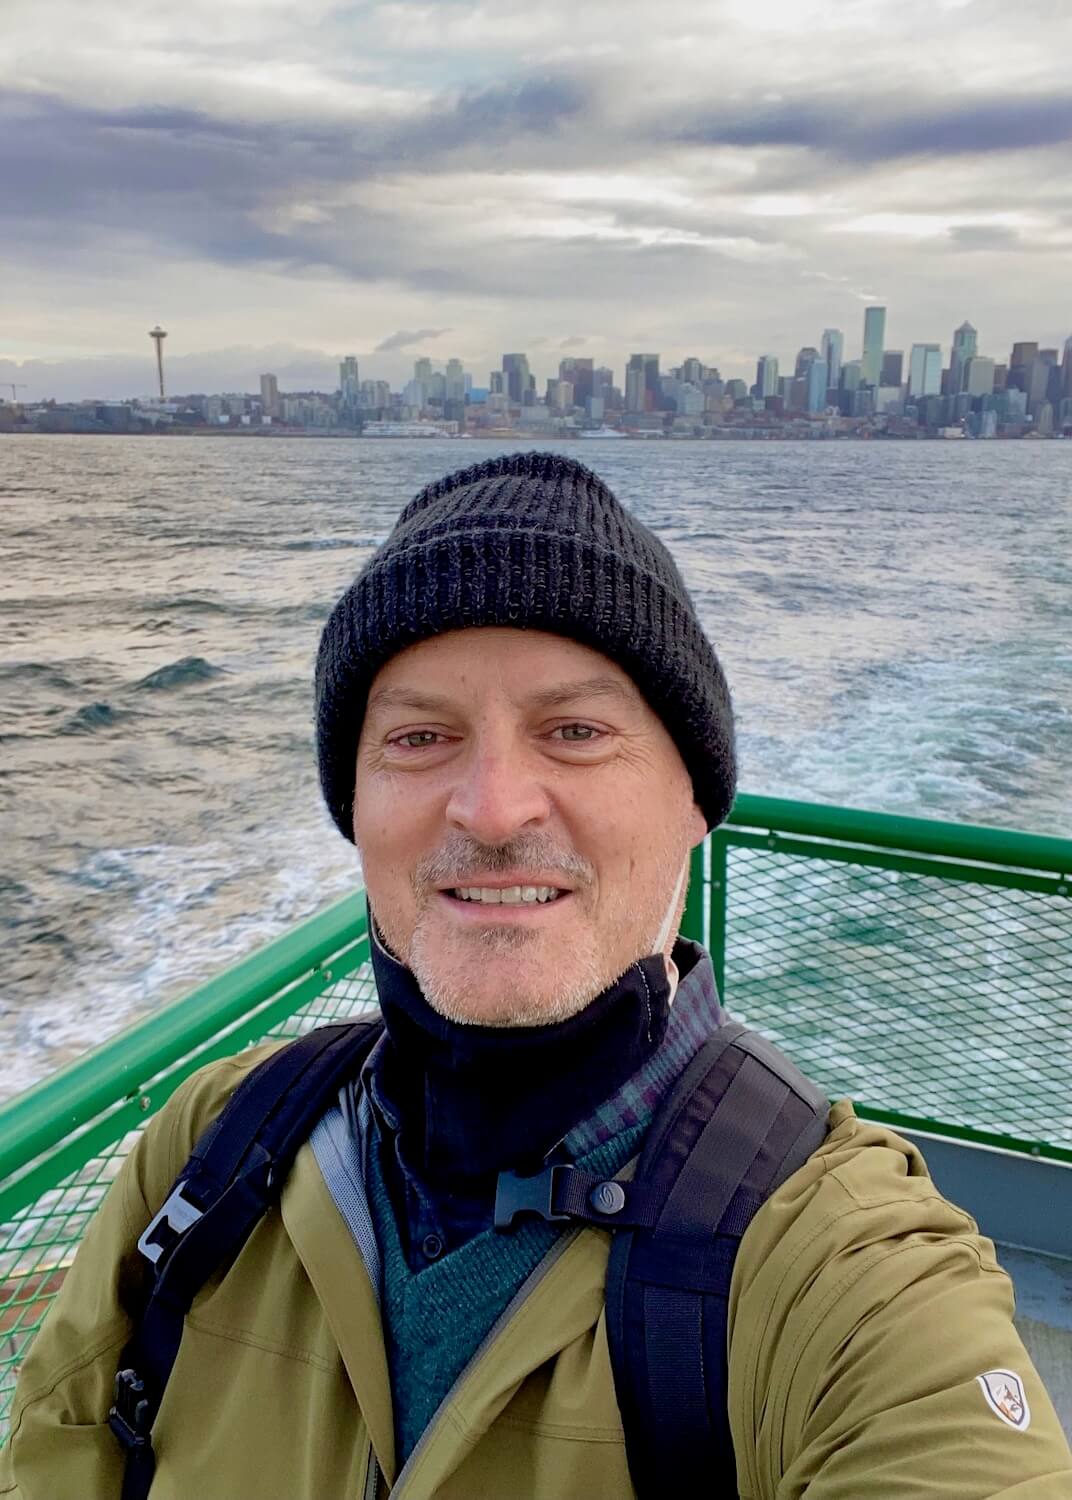 Selfie of Matthew Kessi on a Washington State Ferry with the skyline of downtown Seattle, including the Space Needle in the background beyond the gray waters of the Salish Sea